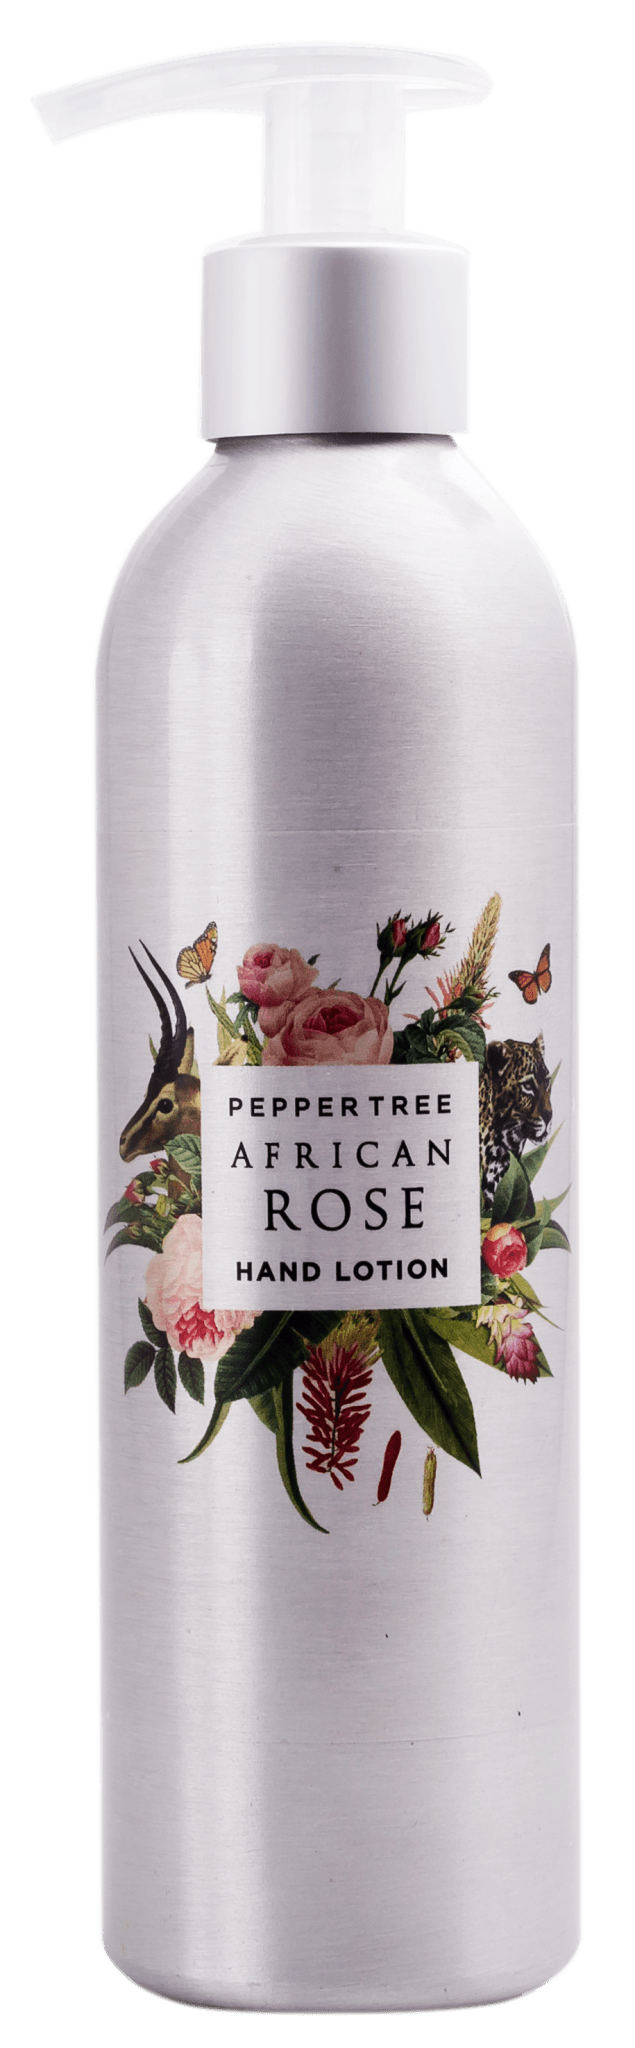 African Rose Hand Lotion 250 ml - Shopping4Africa